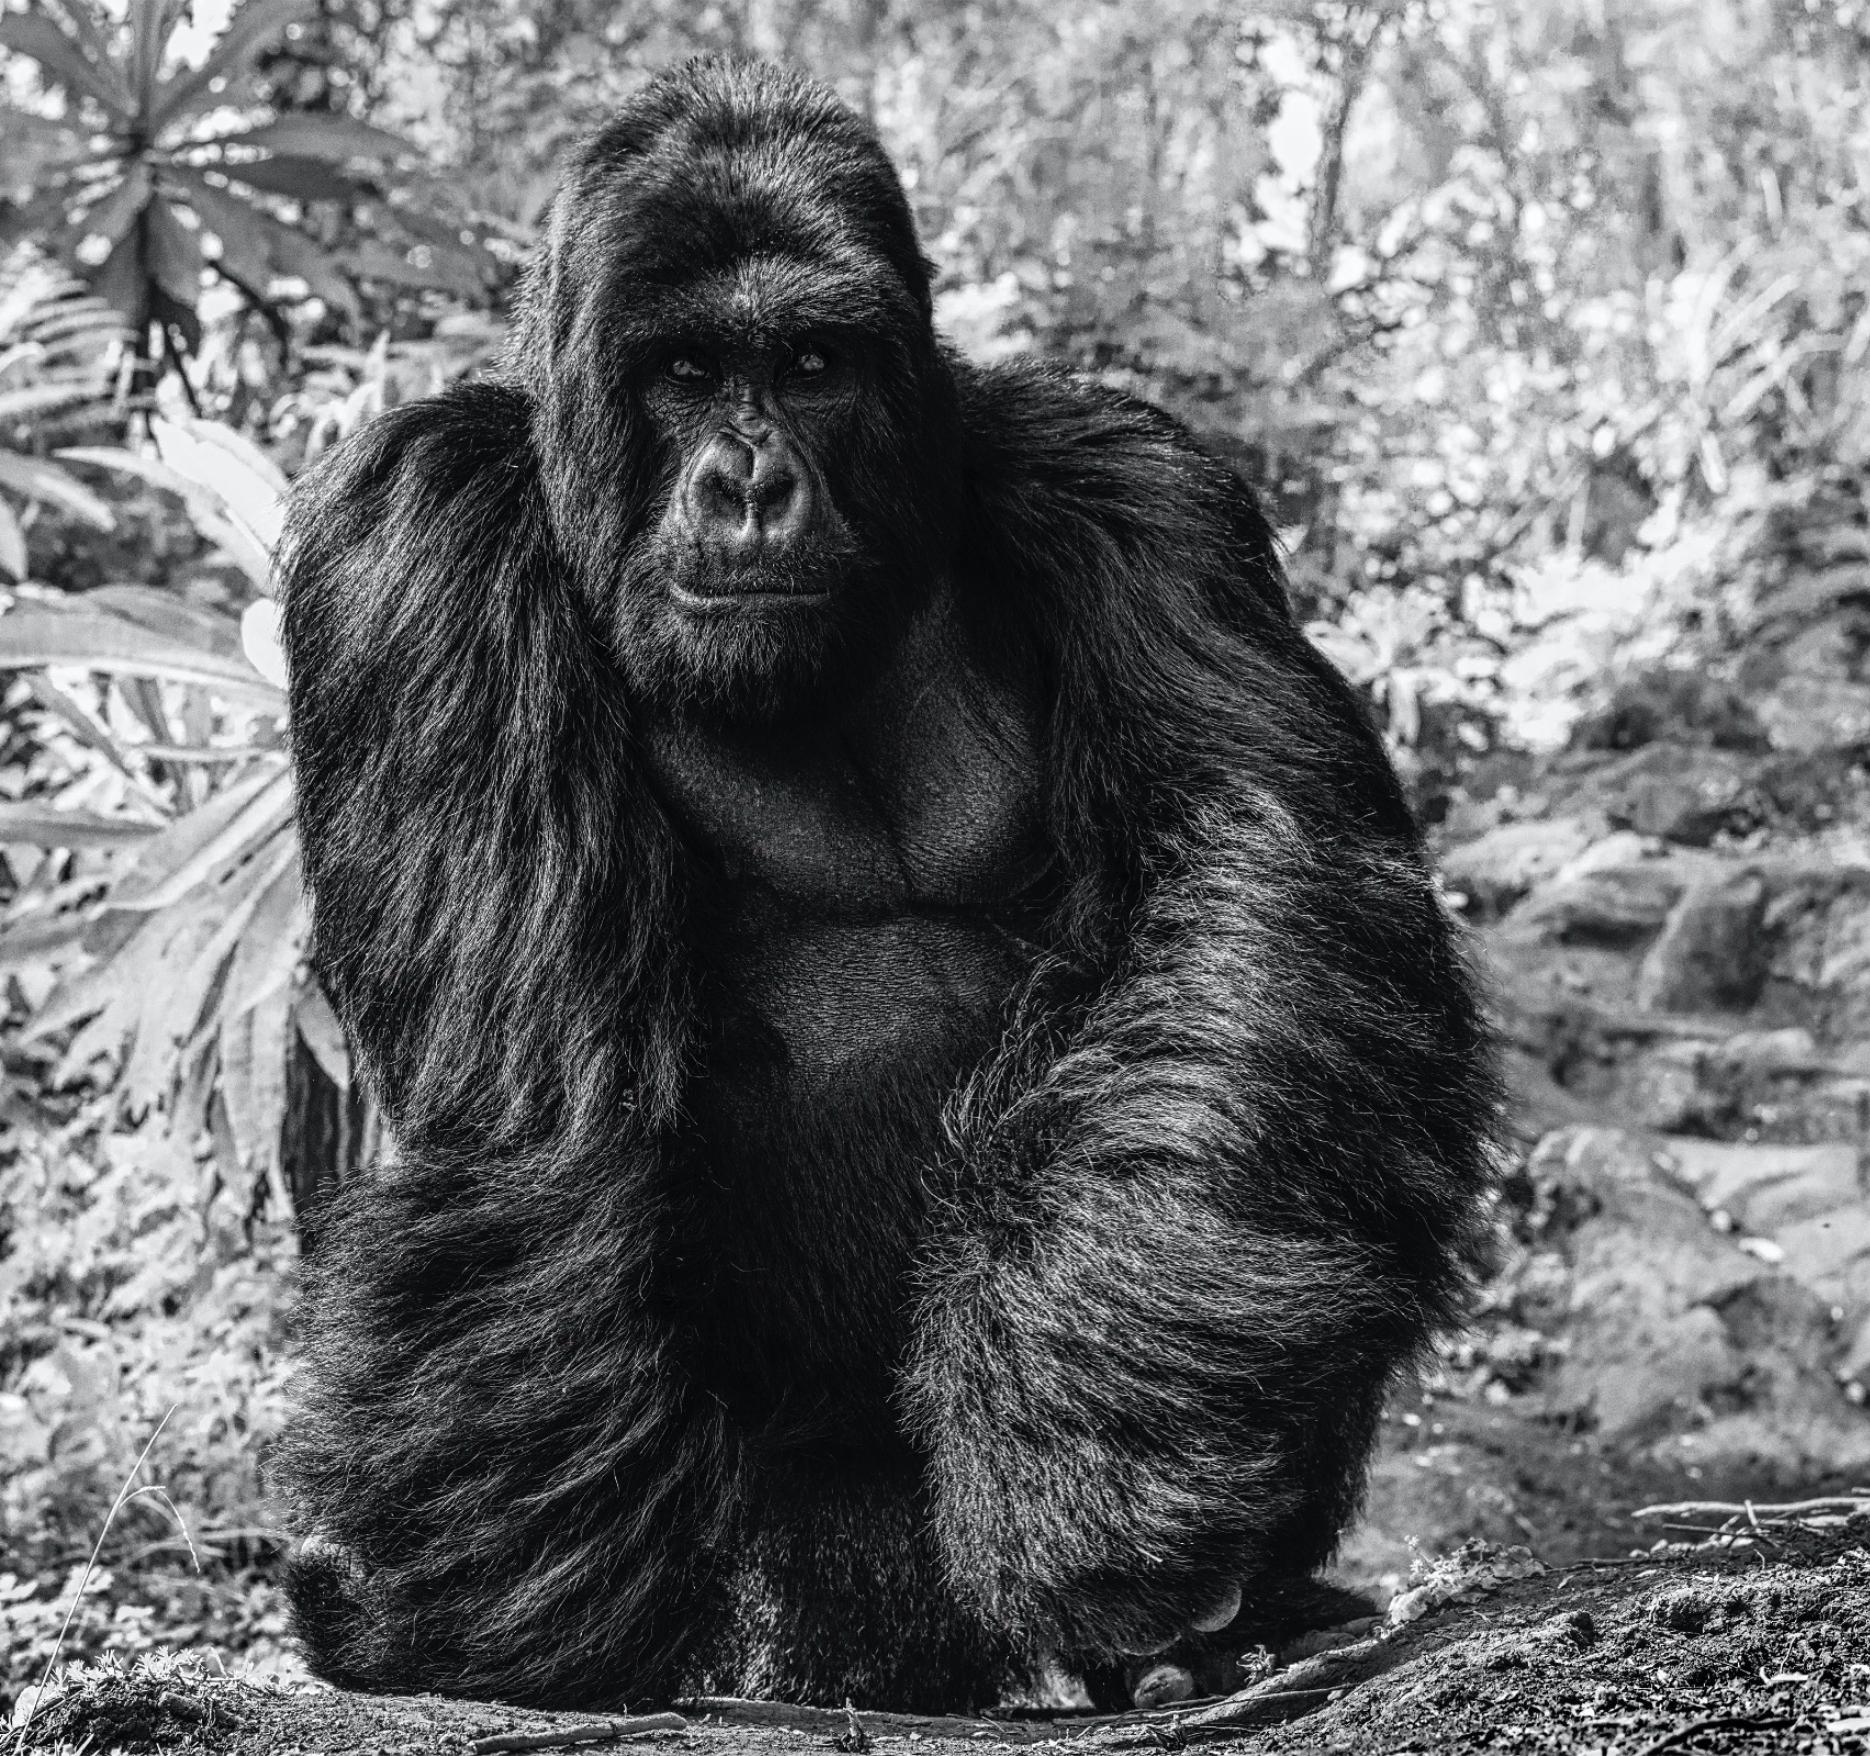 David Yarrow Black and White Photograph - The King's Road